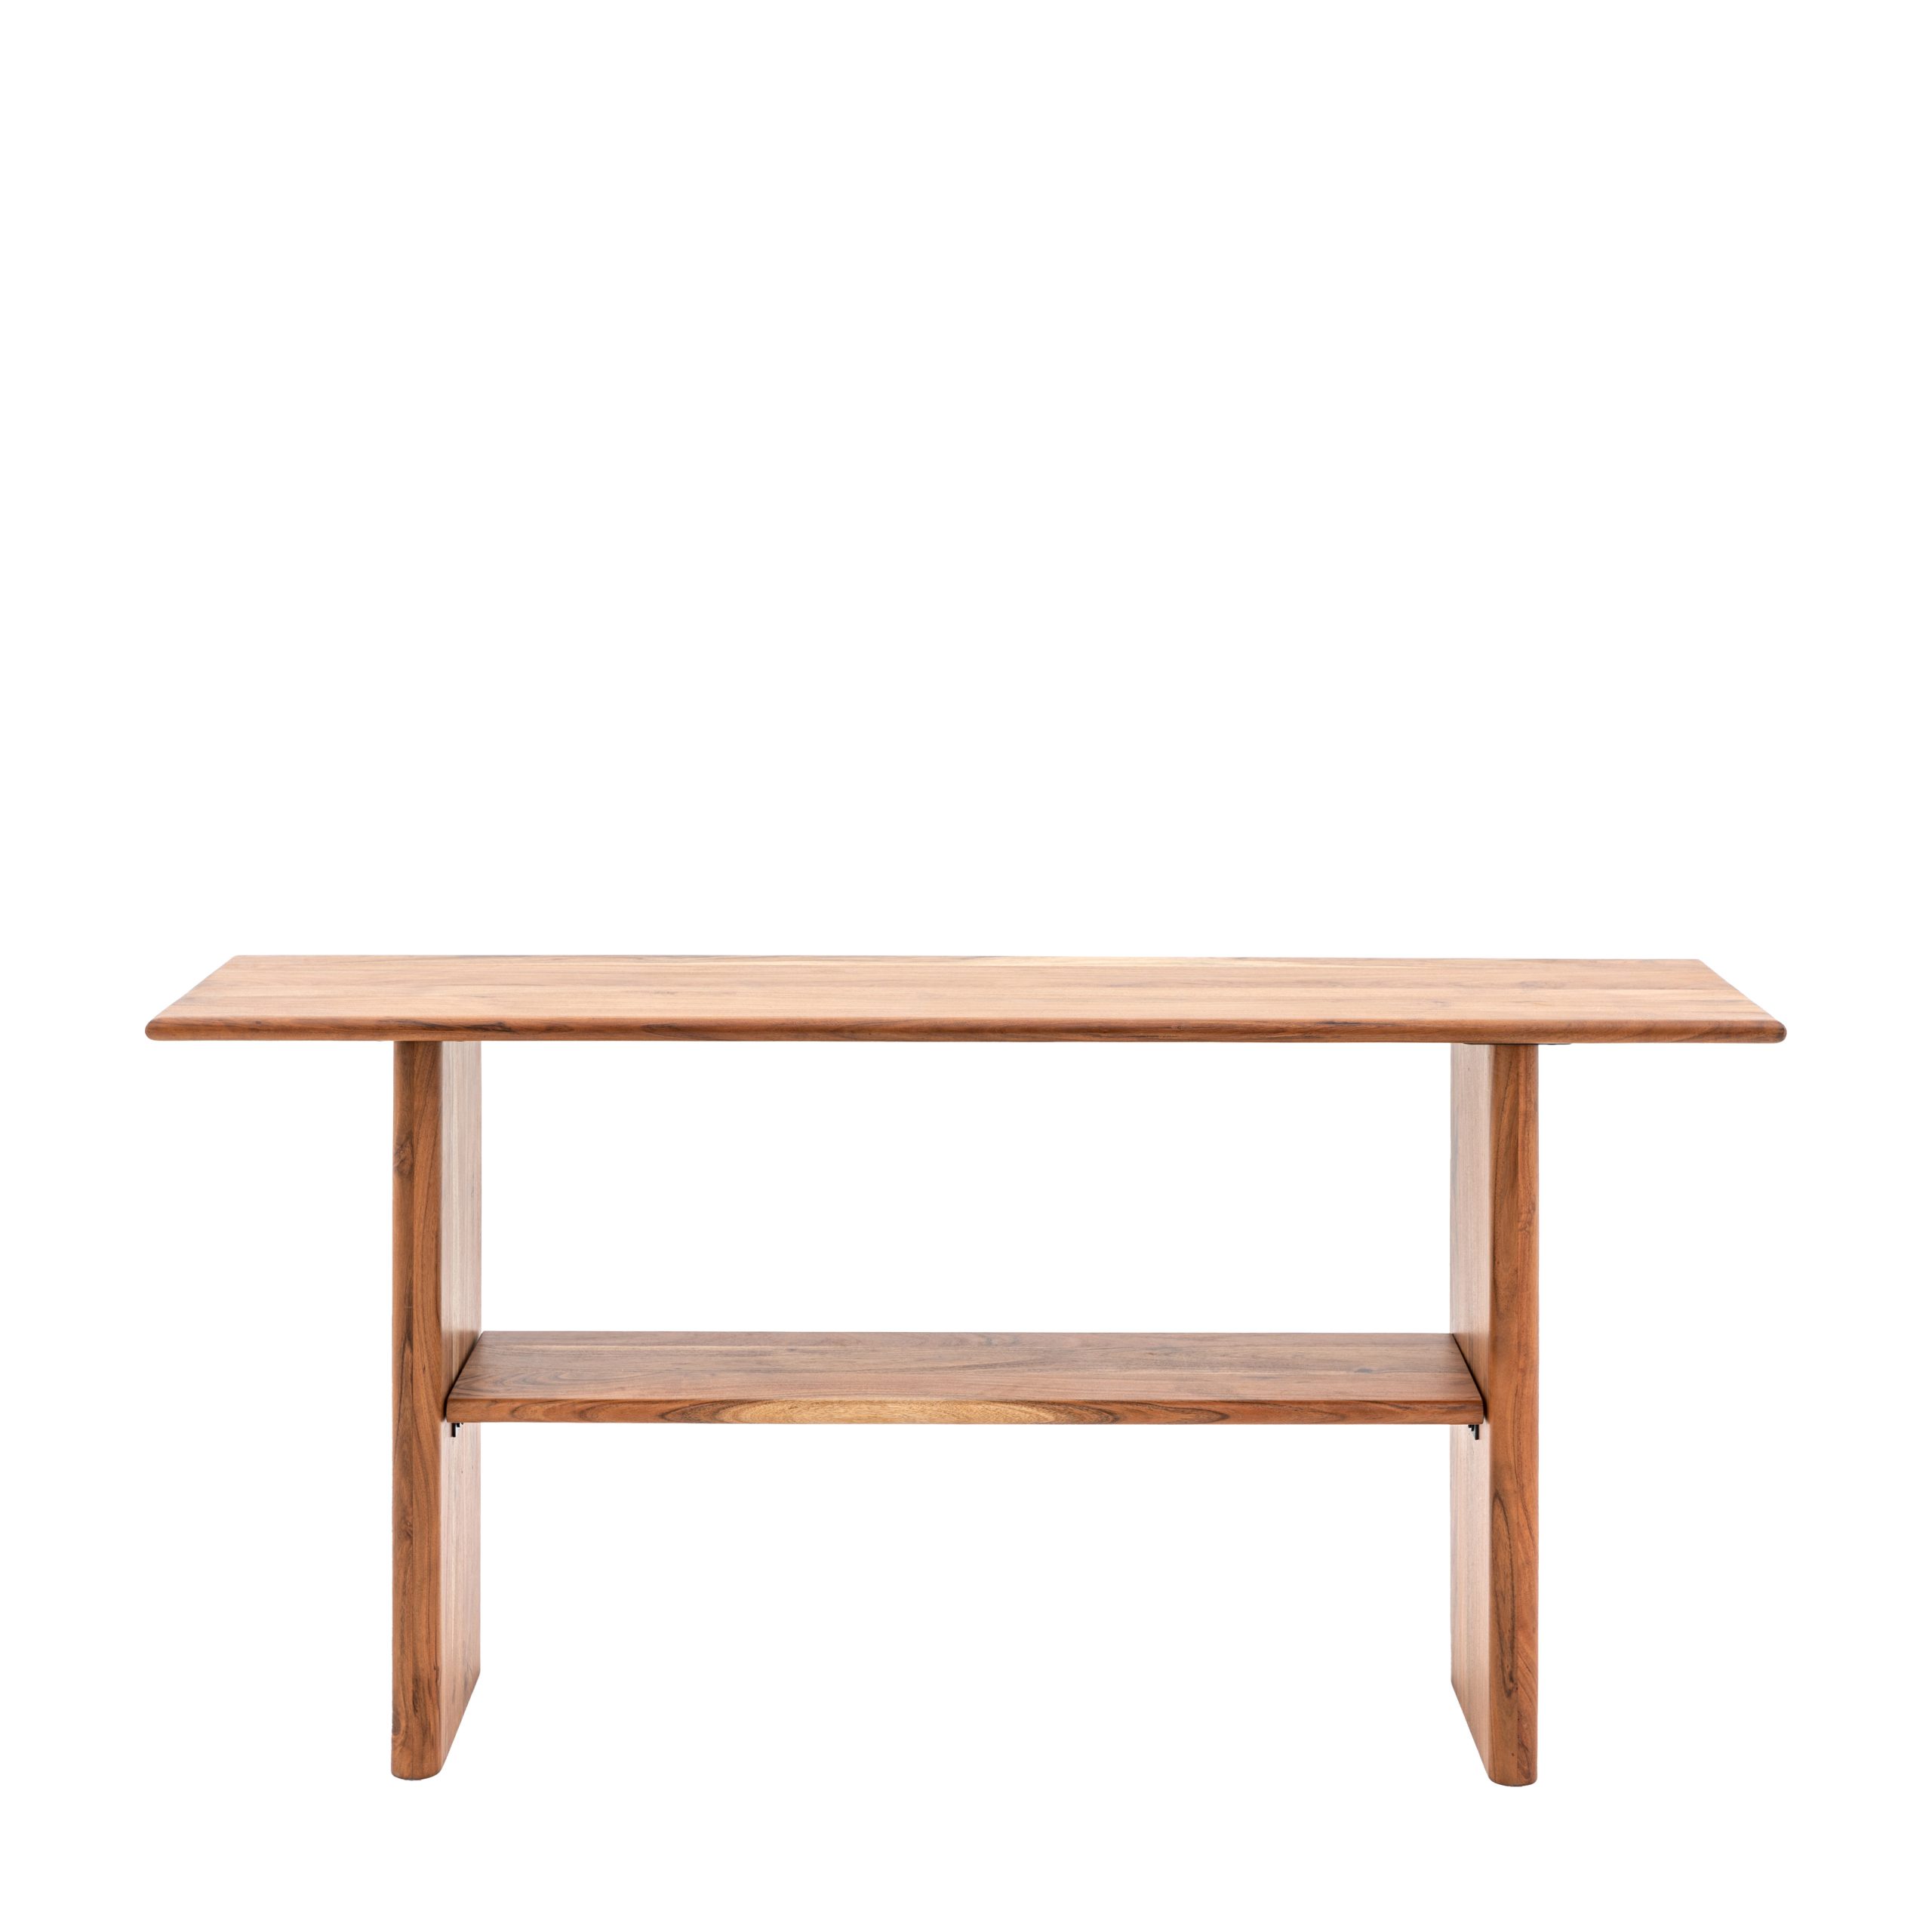 Gallery Direct Borden Console Table